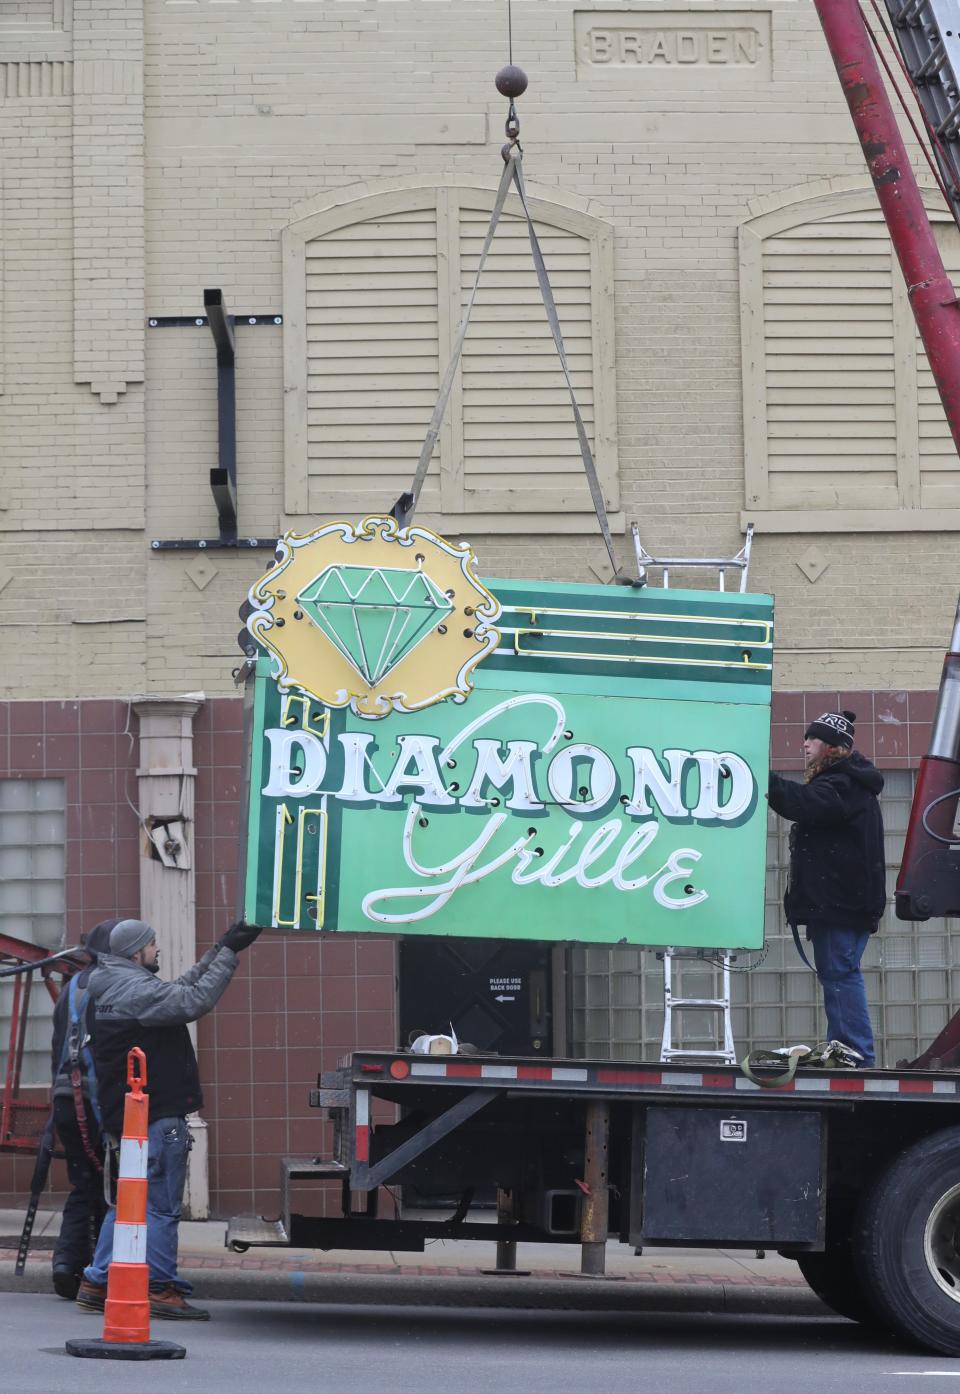 Workers from Adams Signs hoist the refurbished iconic sign of the Diamond Grille in Akron.